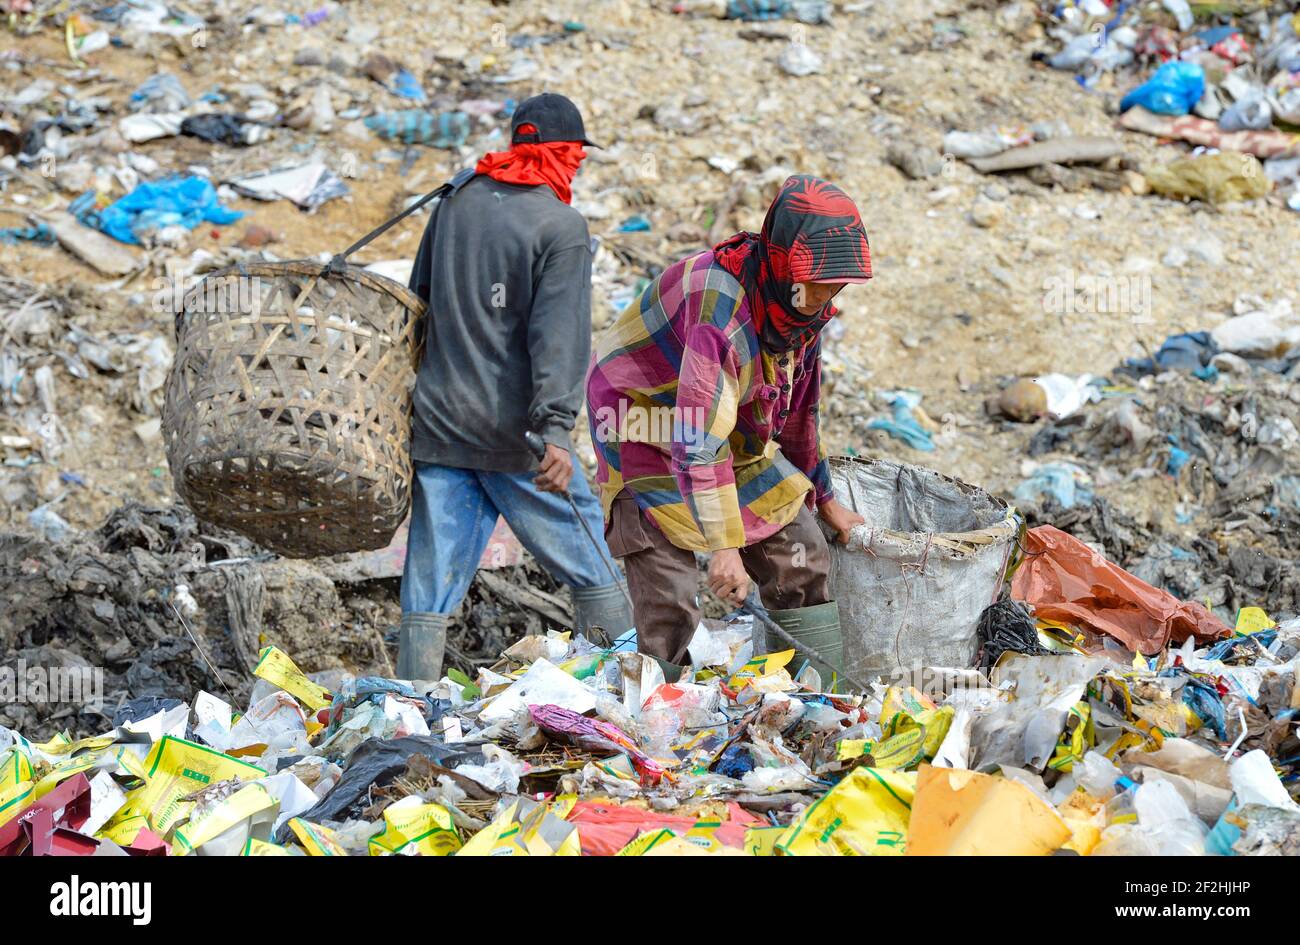 LHOKSEUMAWE, ACEH, INDONESIA - 2018/09/21: scavengers are seen looking for plastic bottle trash at a garbage dump in Lhokseumawe. Stock Photo